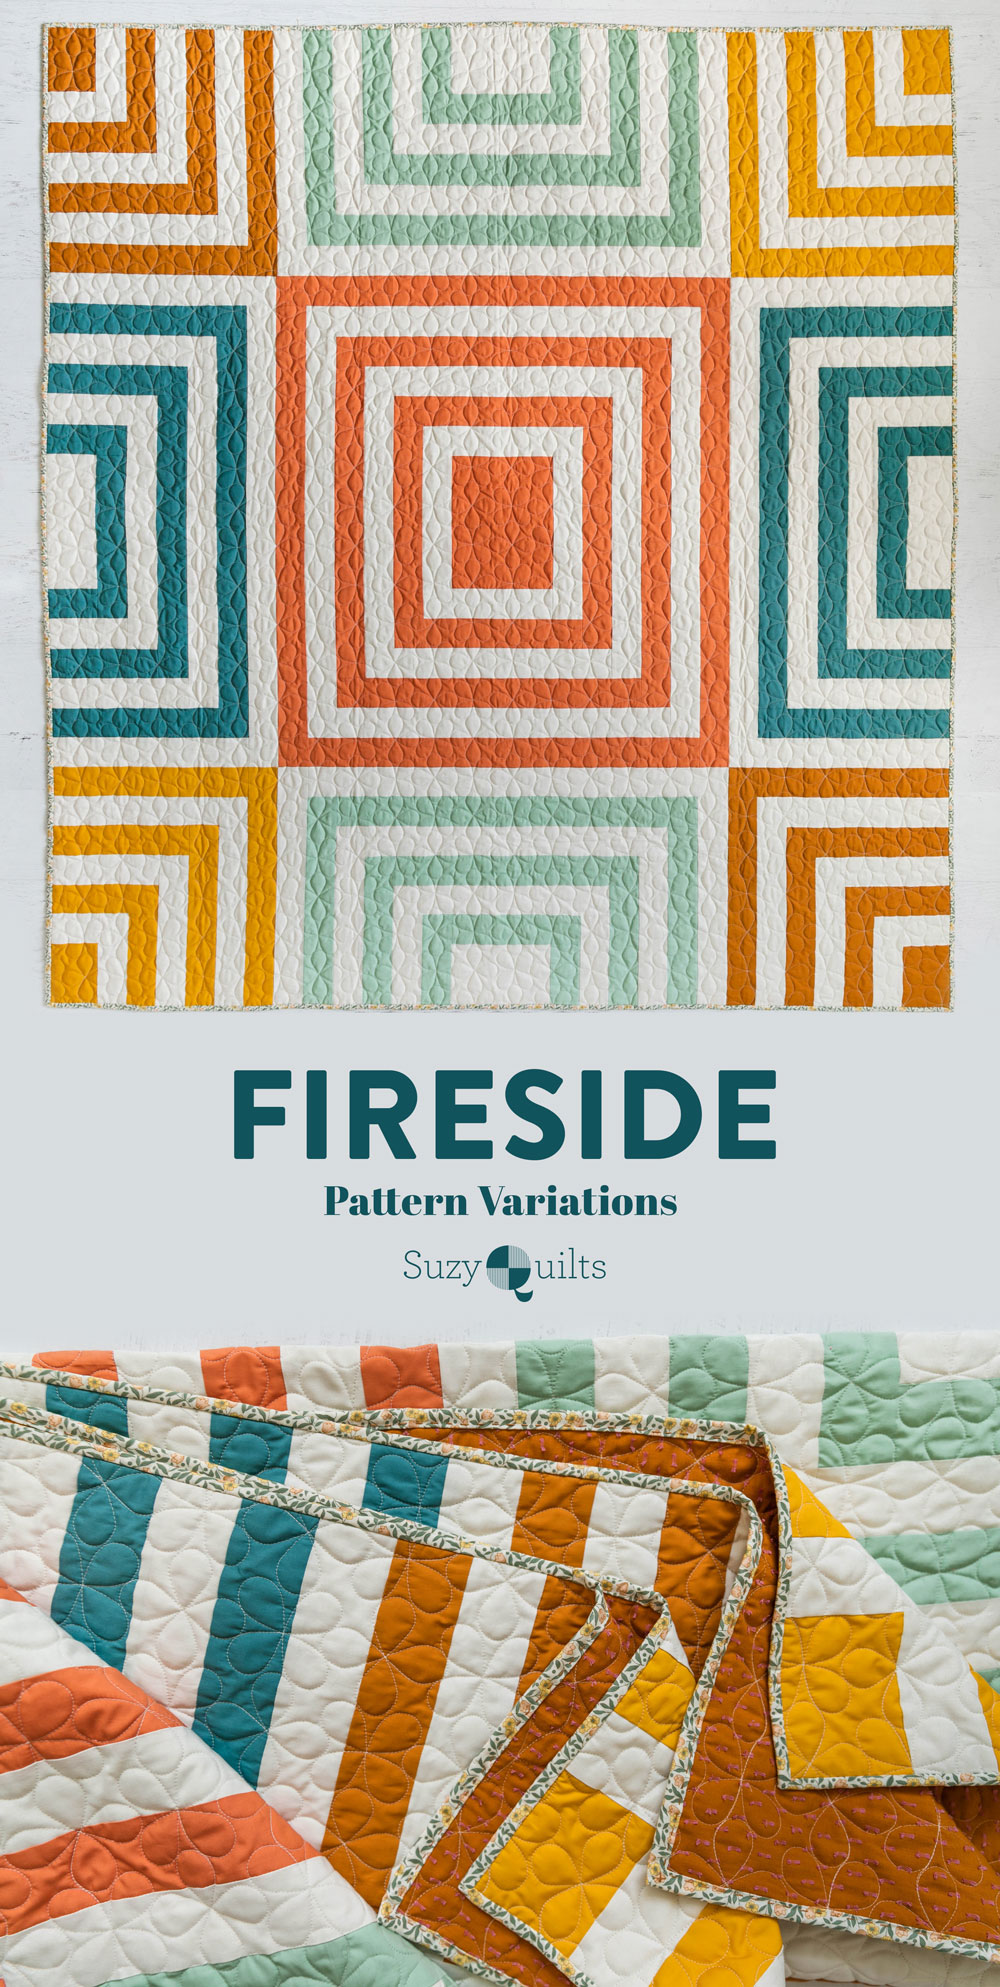 The Fireside Quilt pattern includes instructions for multi-color and limited-color variations. Follow some of these simple adjustments to make lots of different variations of this beginner-friendly quilt pattern! suzyquilts.com